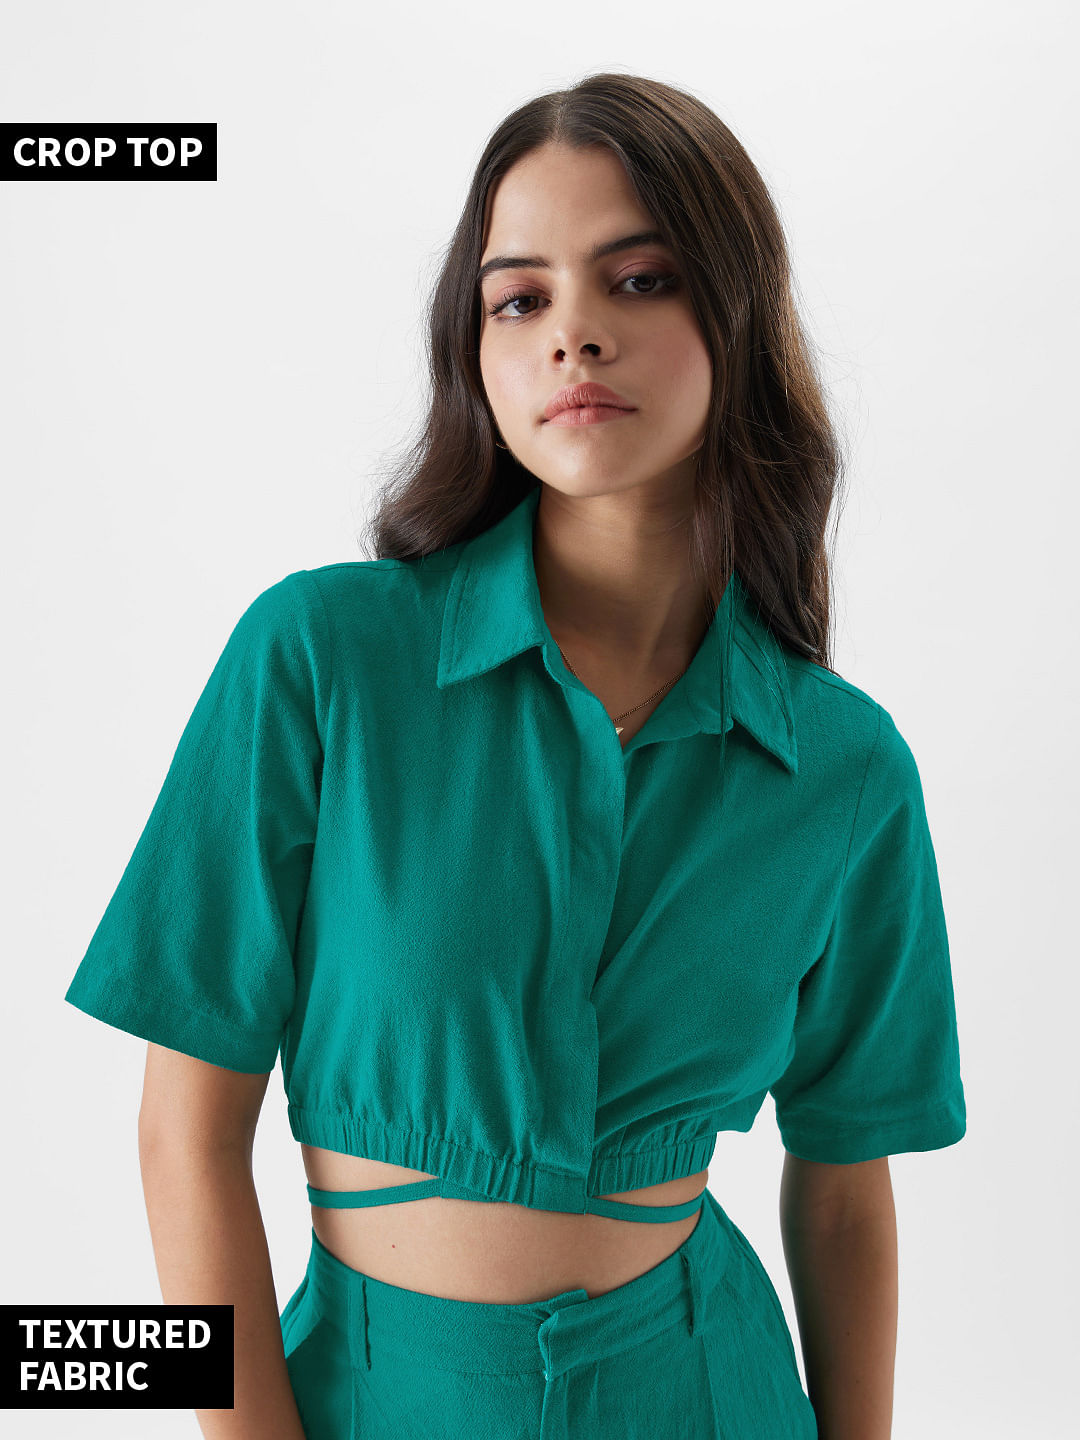 Buy Solids: Teal Green Women Cropped Tops Online